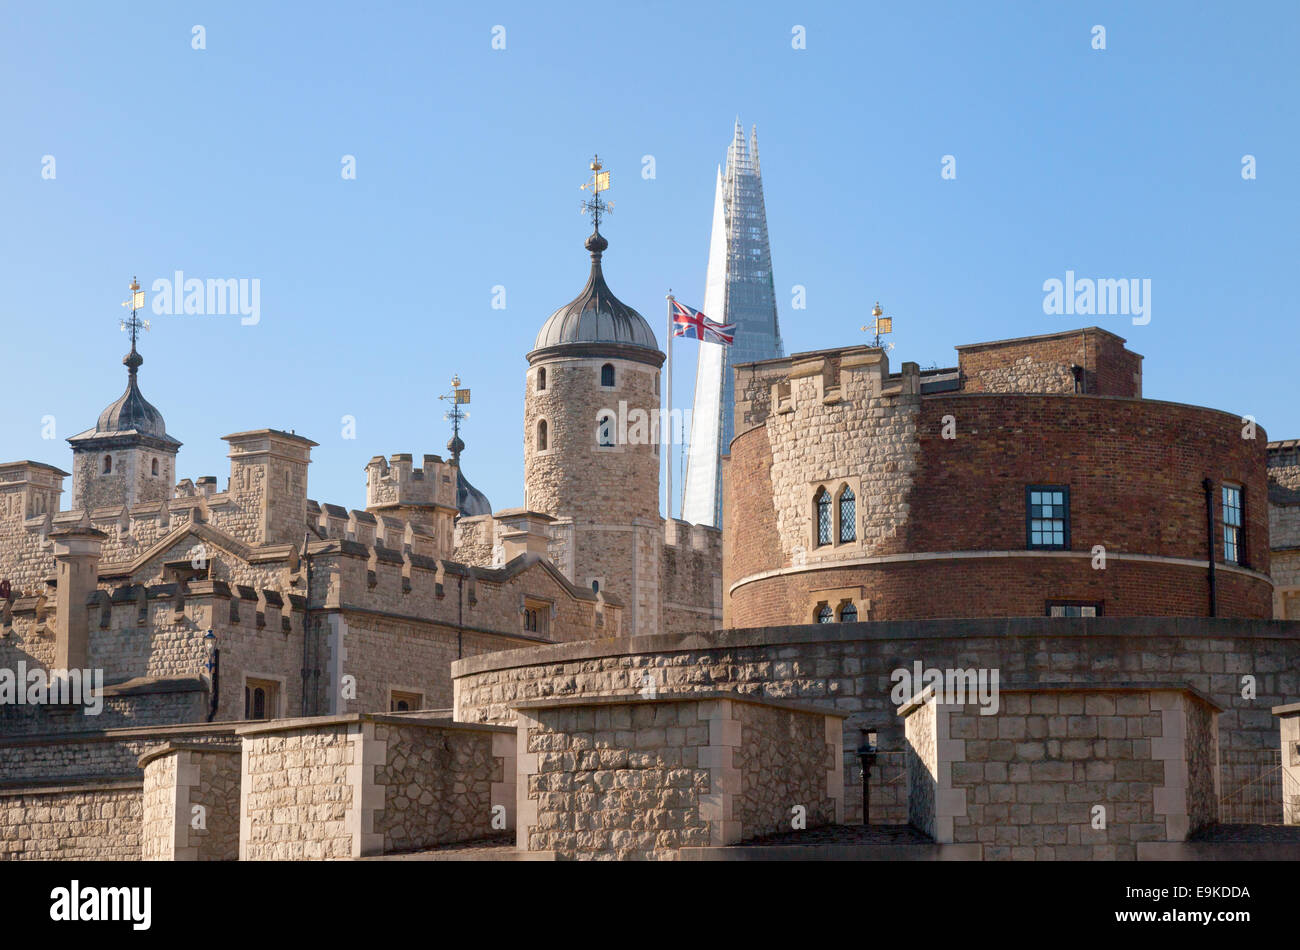 London skyline, concept of Old and New, Ancient and Modern; The Tower of London with the Shard; London England UK Stock Photo